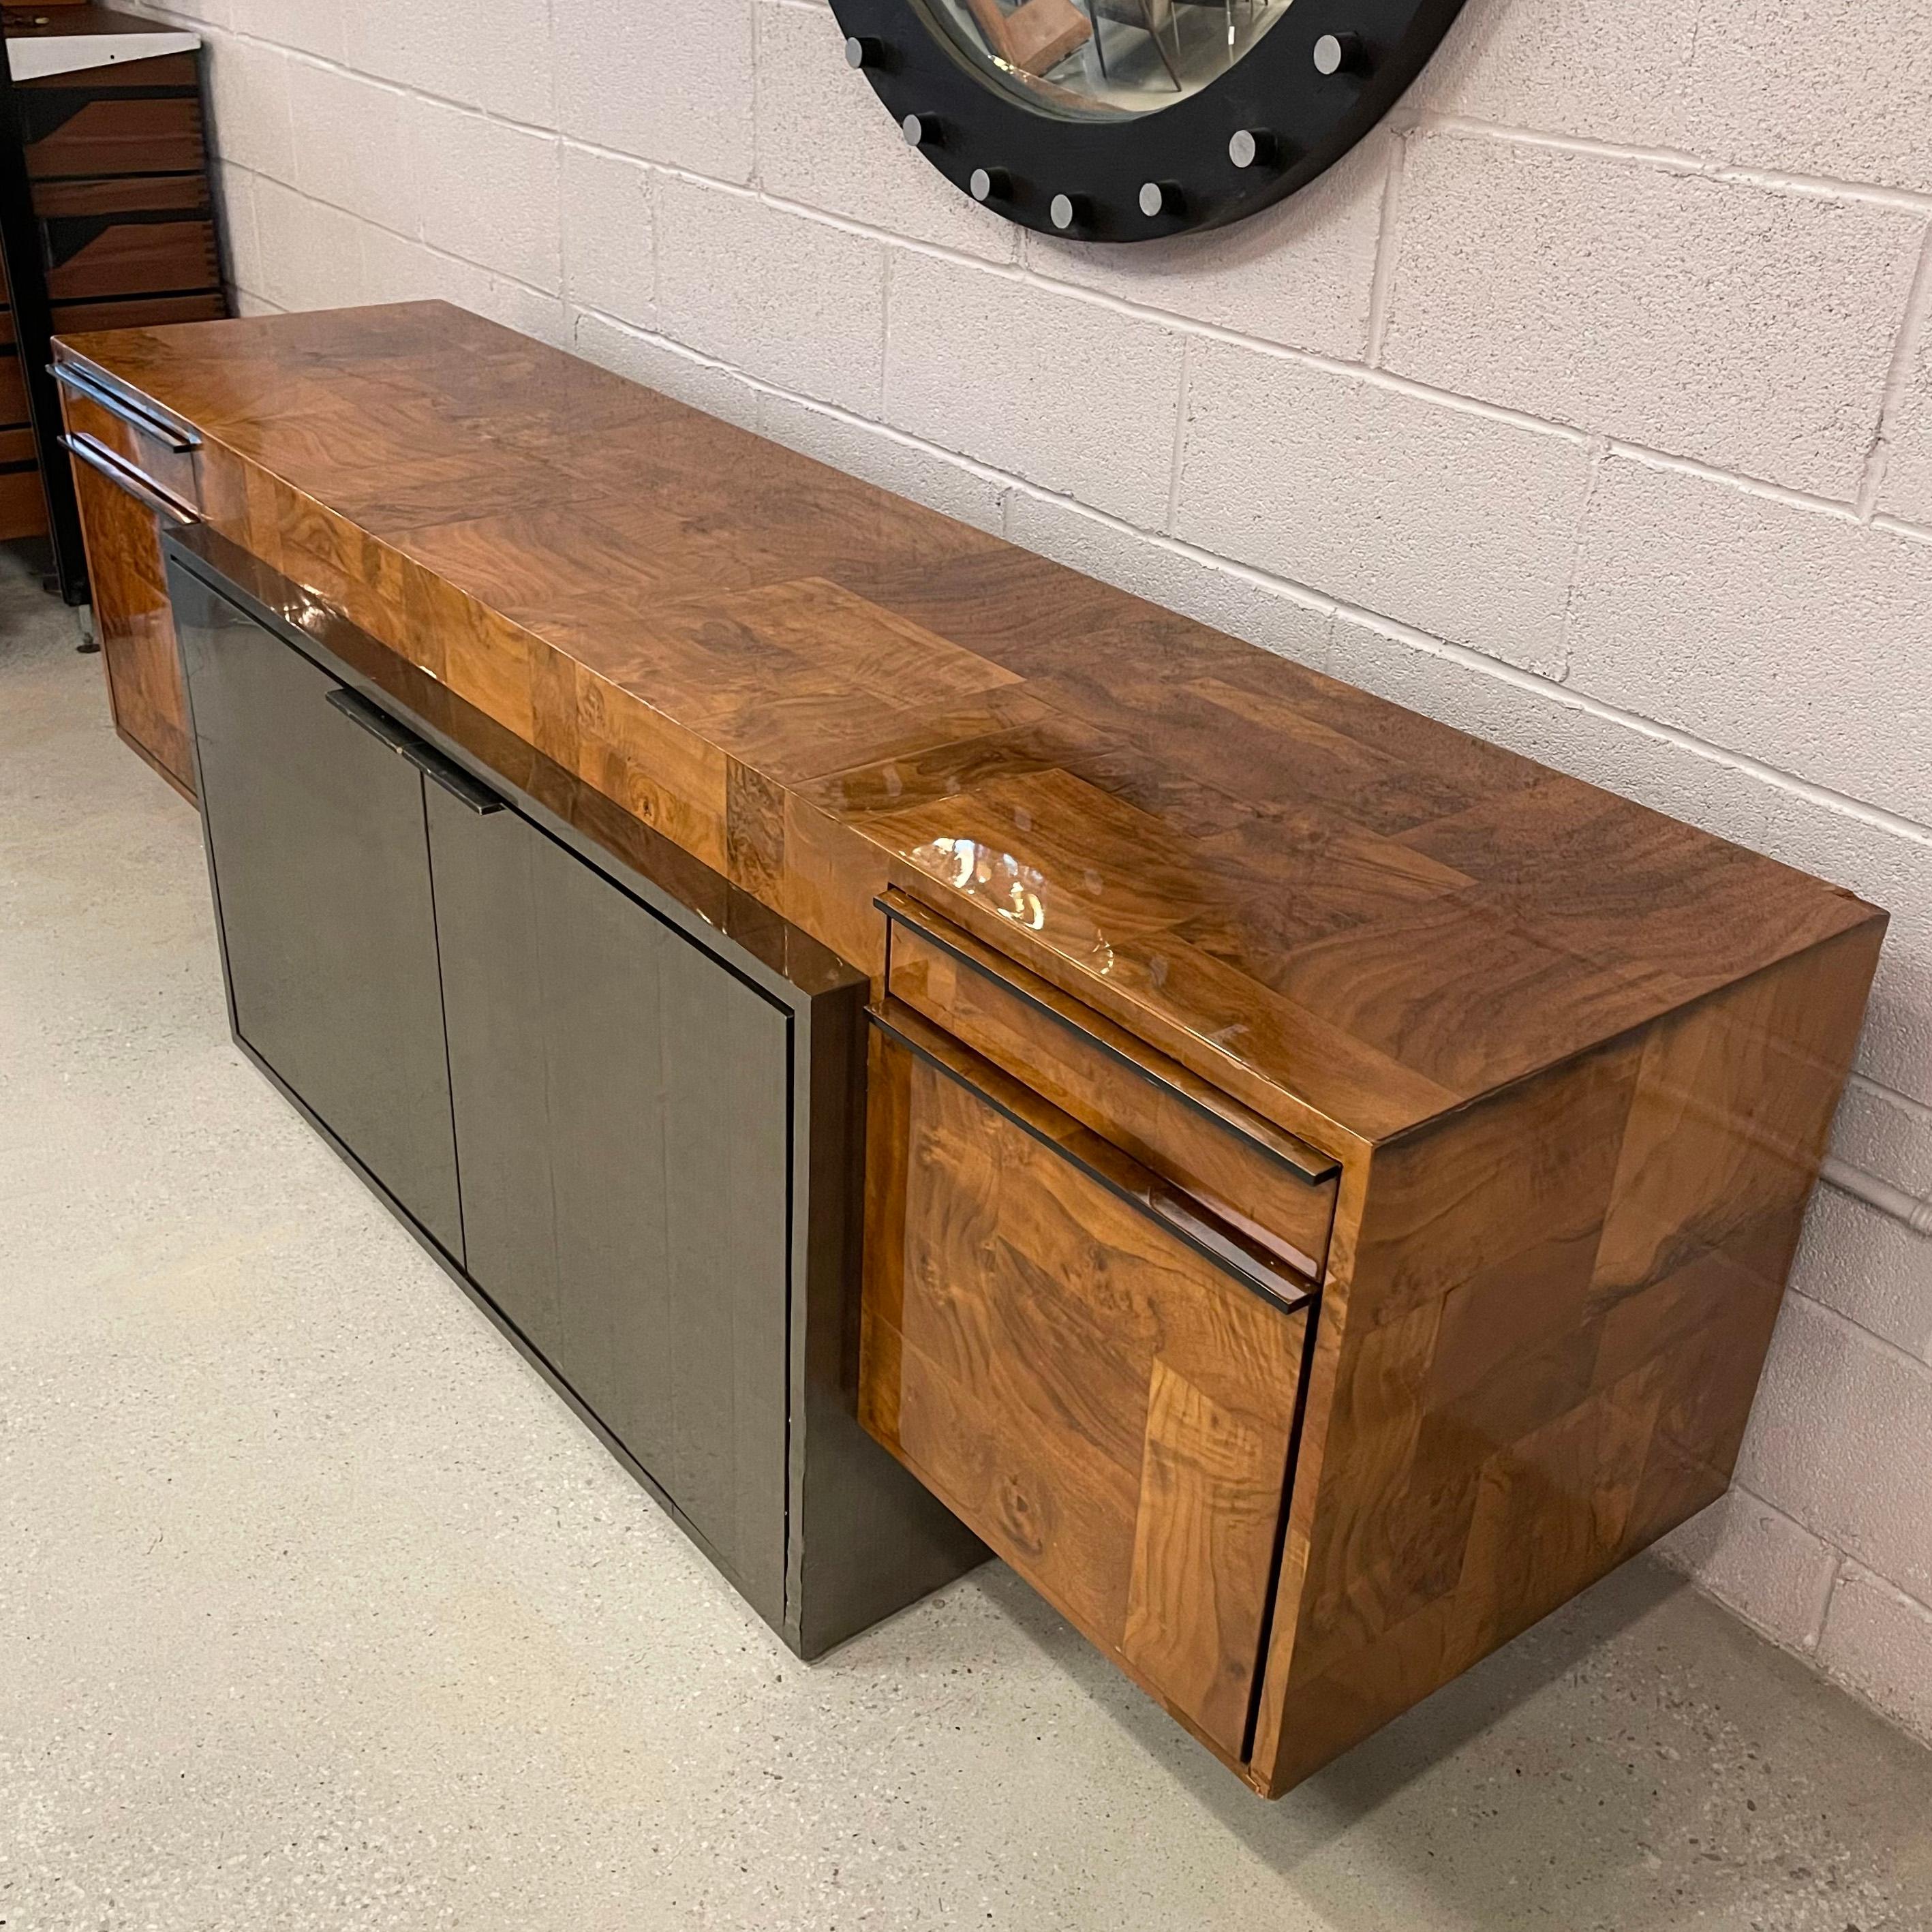 Modernist Patchwork Burl Credenza By Paul Evans For Directional In Good Condition For Sale In Brooklyn, NY